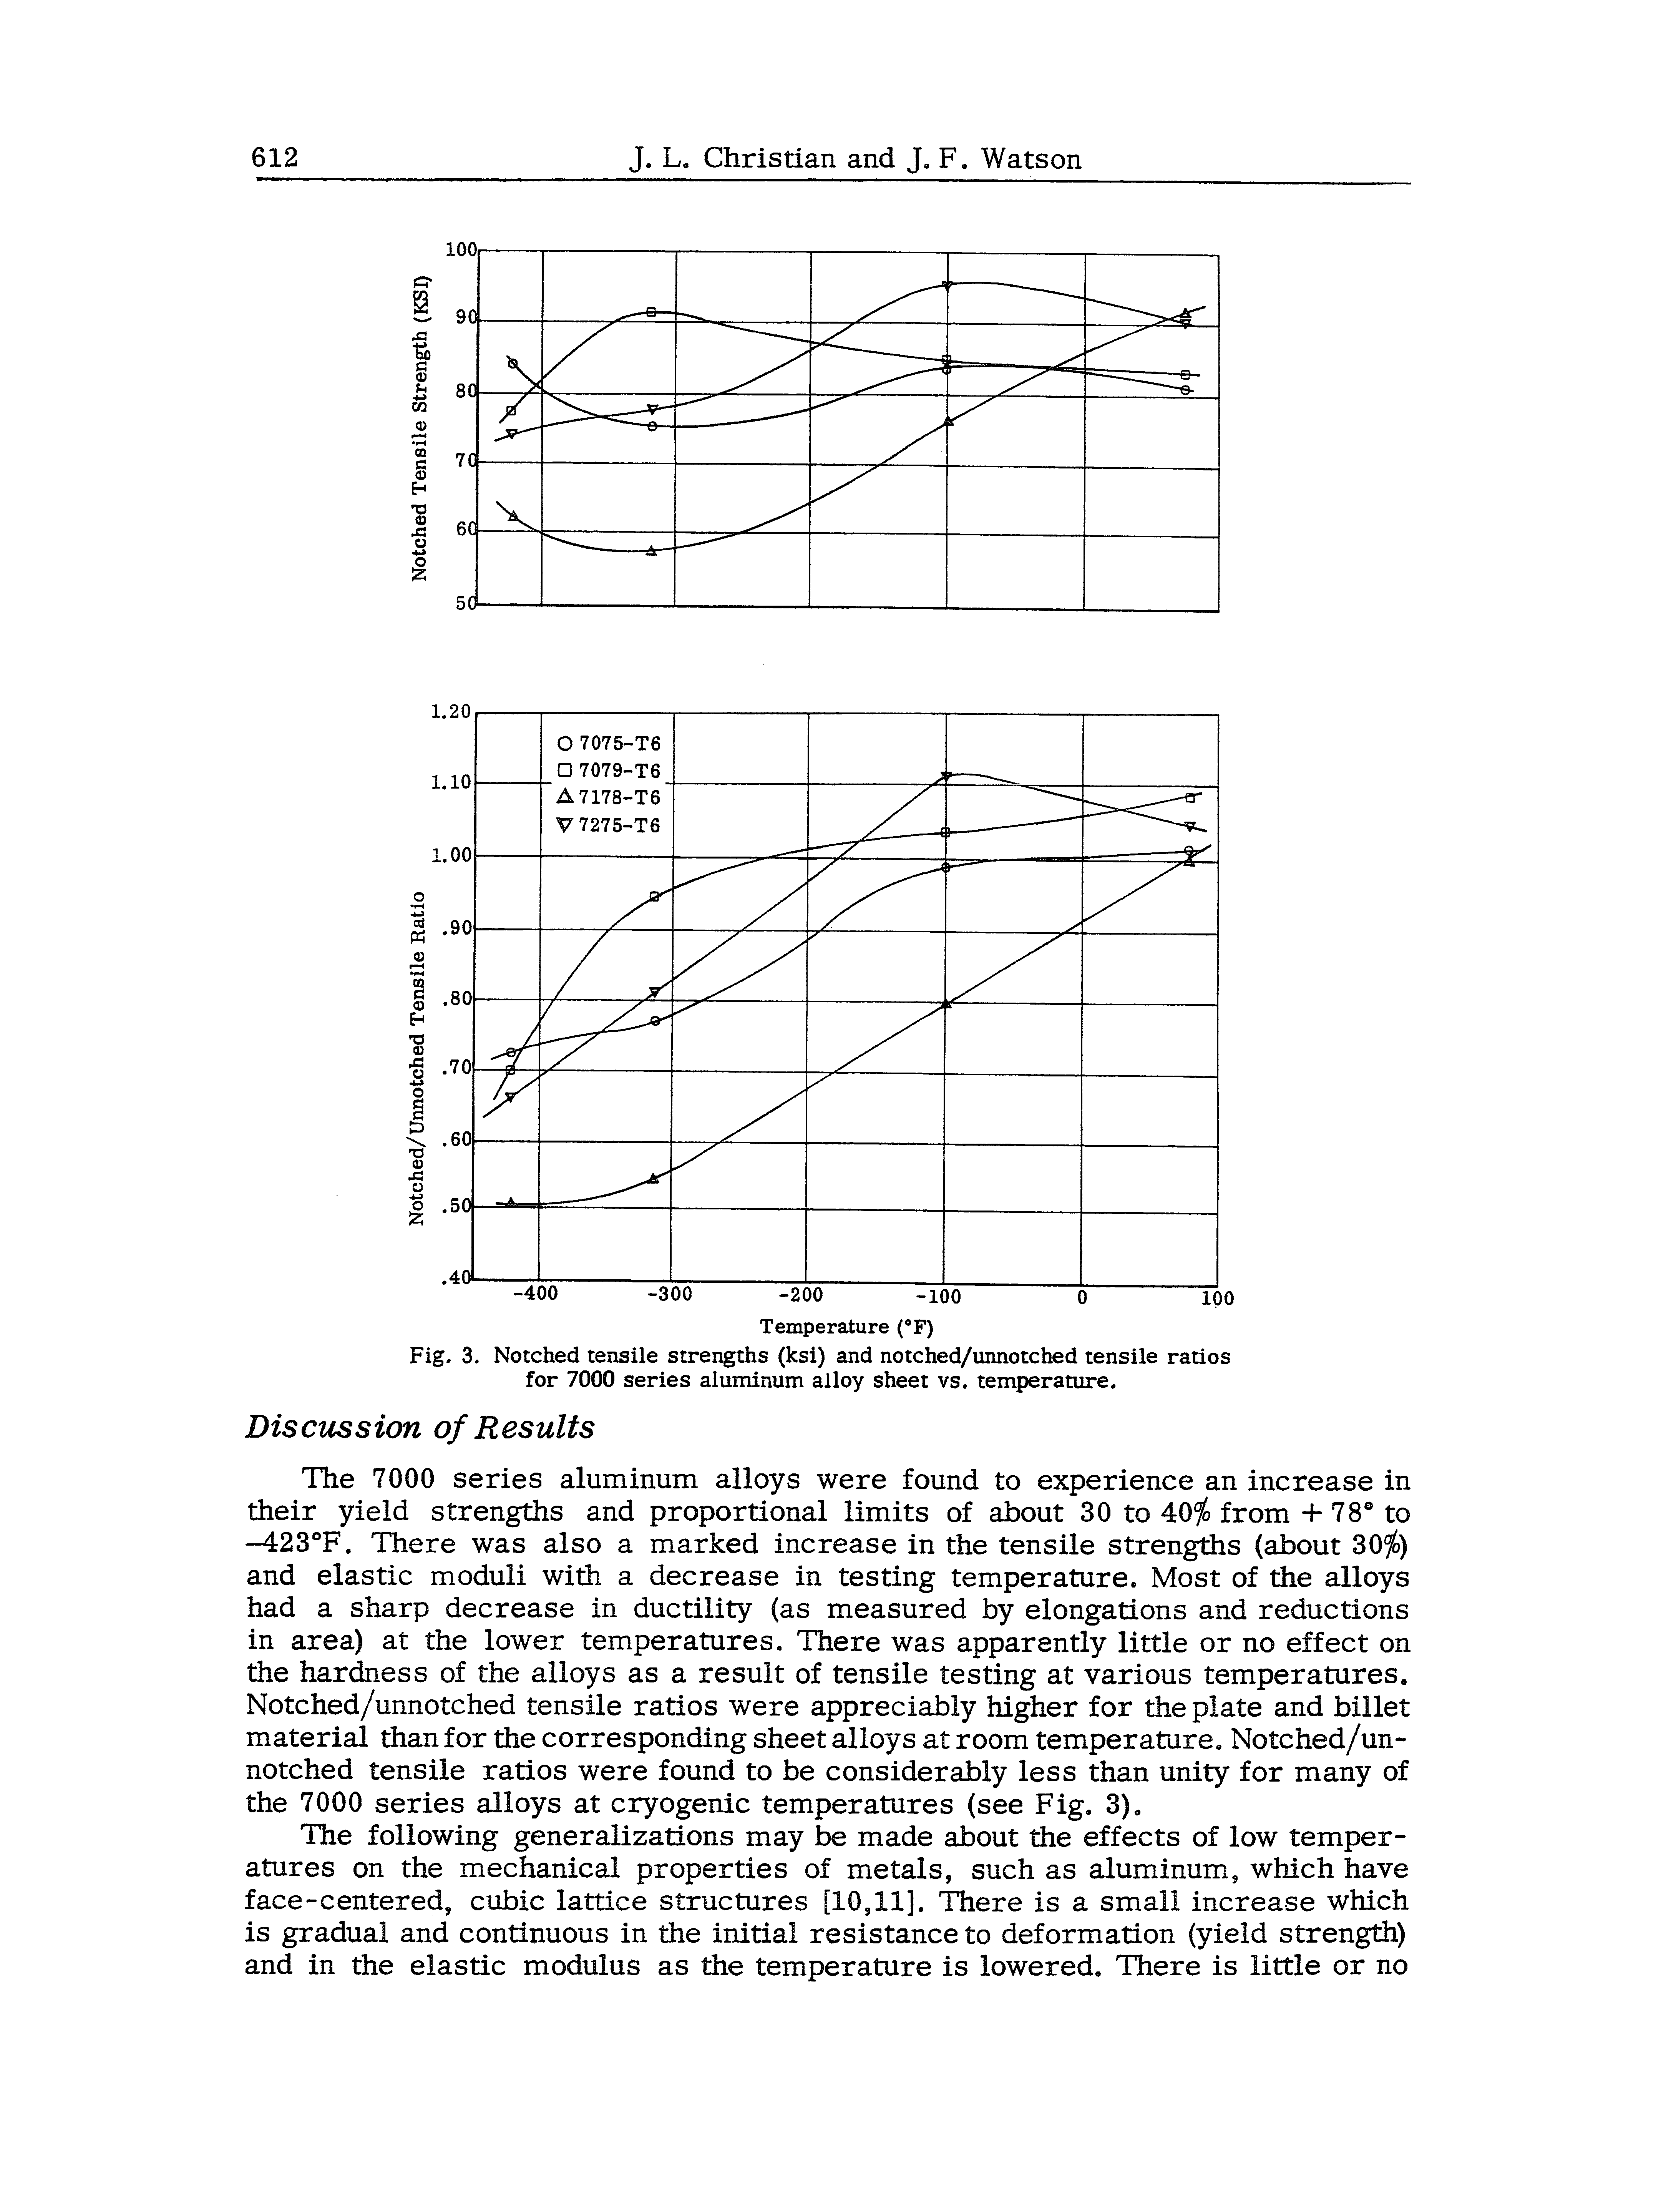 Fig. 3. Notched tensile strengths (ksl) and notched/iinnotched tensile ratios for 7000 series aluminum alloy sheet vs. temperature.